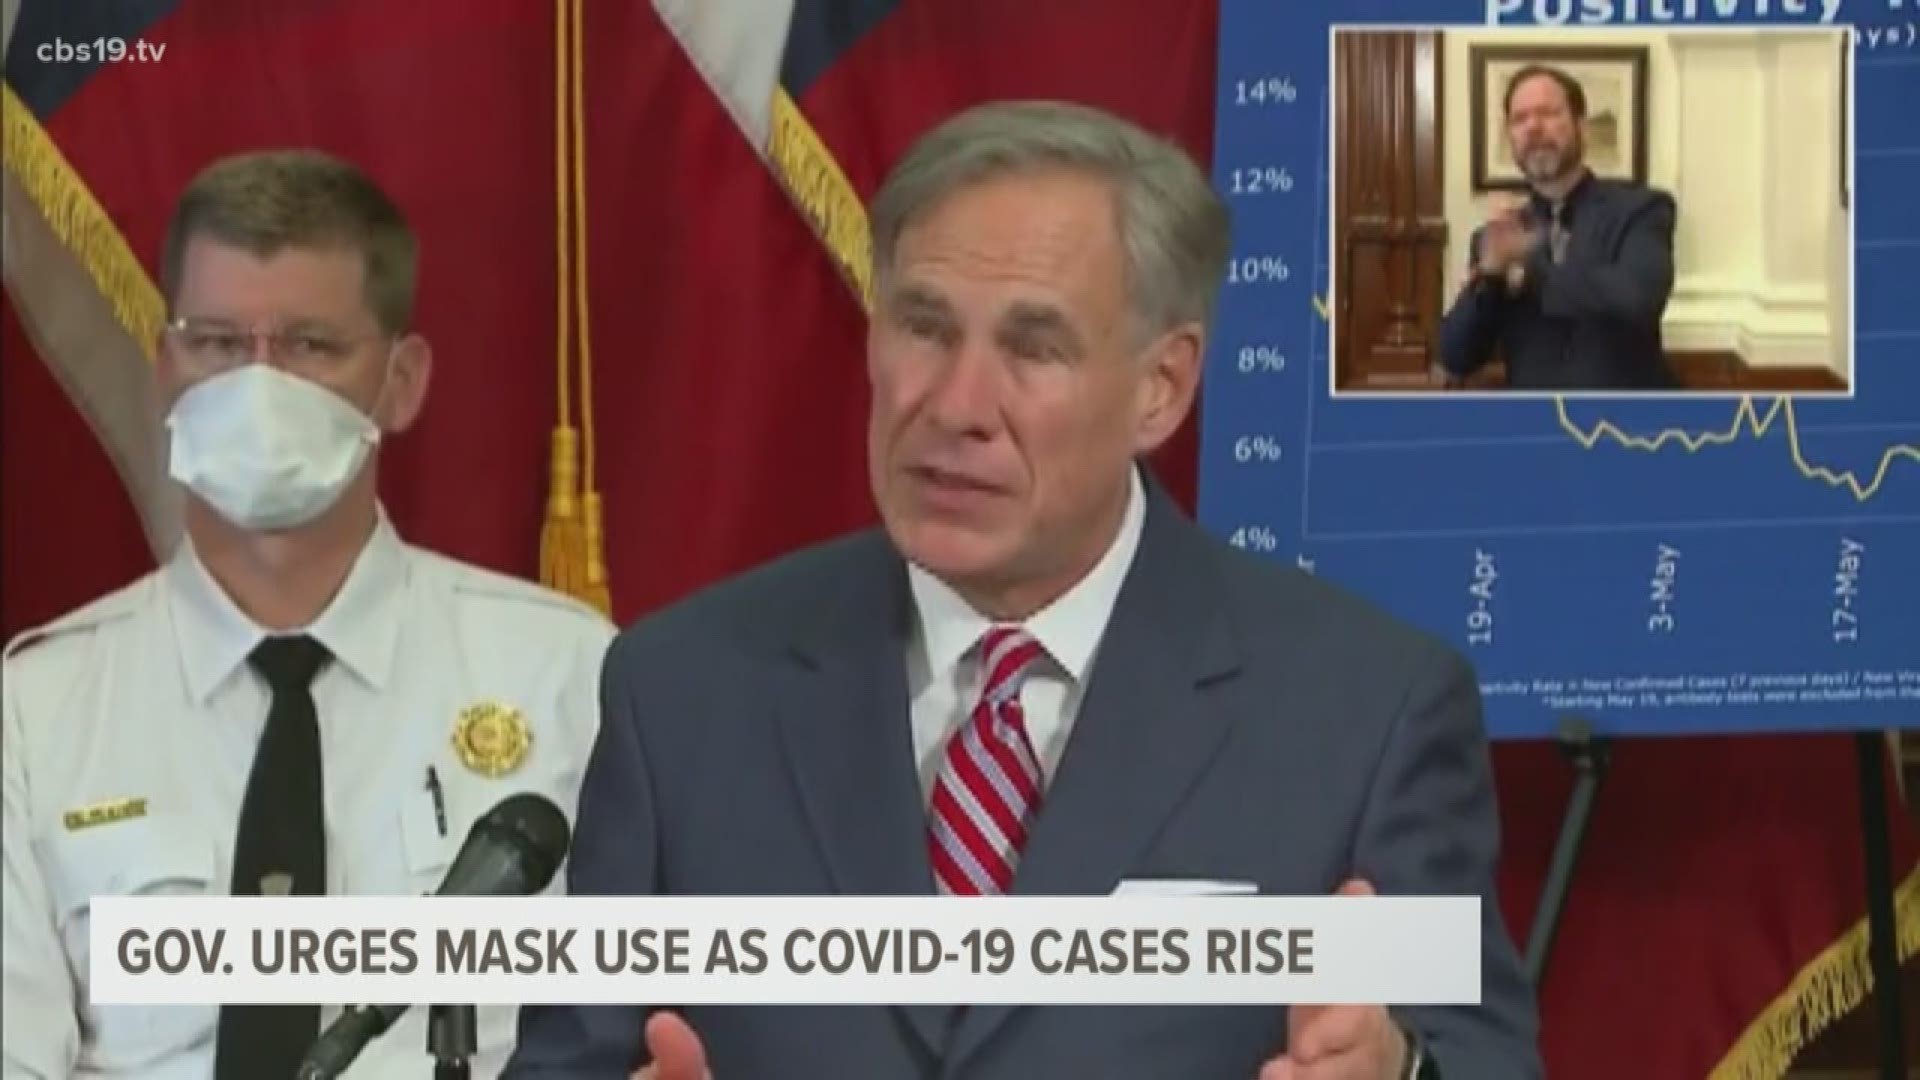 Gov. Abbott told Texans the rise in cases in 'unacceptable.'